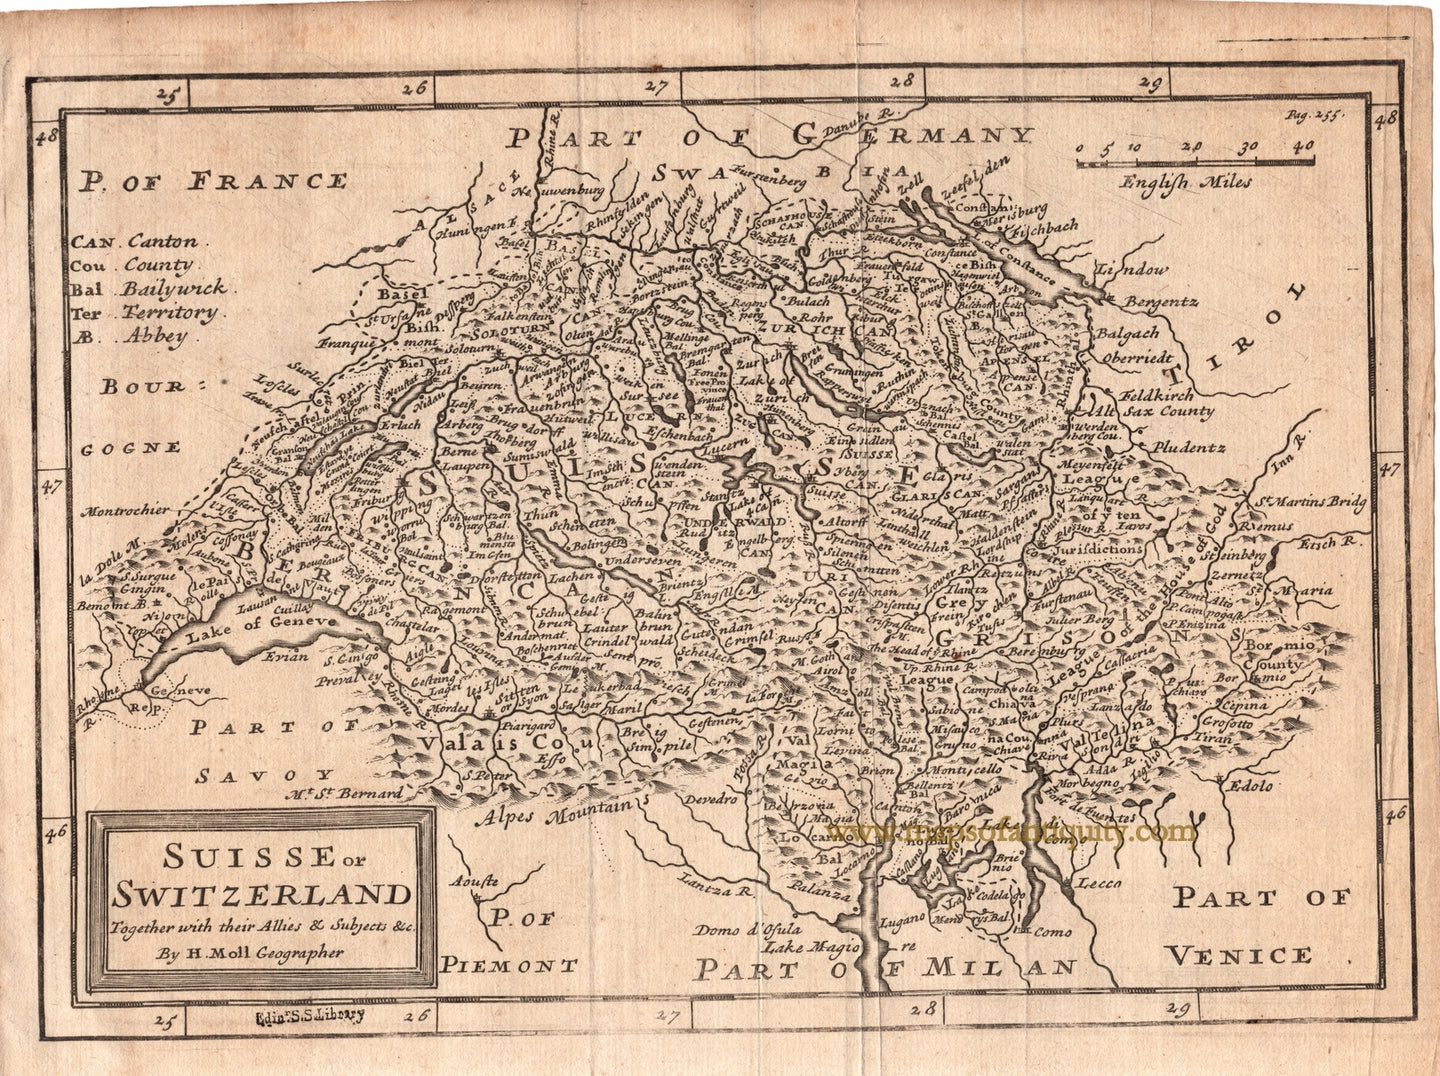 Black-and-White-Antique-Map-Suisse-or-Switzerland-Together-with-their-Allies-&-Subjects-Europe--c.-1735-Moll-Maps-Of-Antiquity